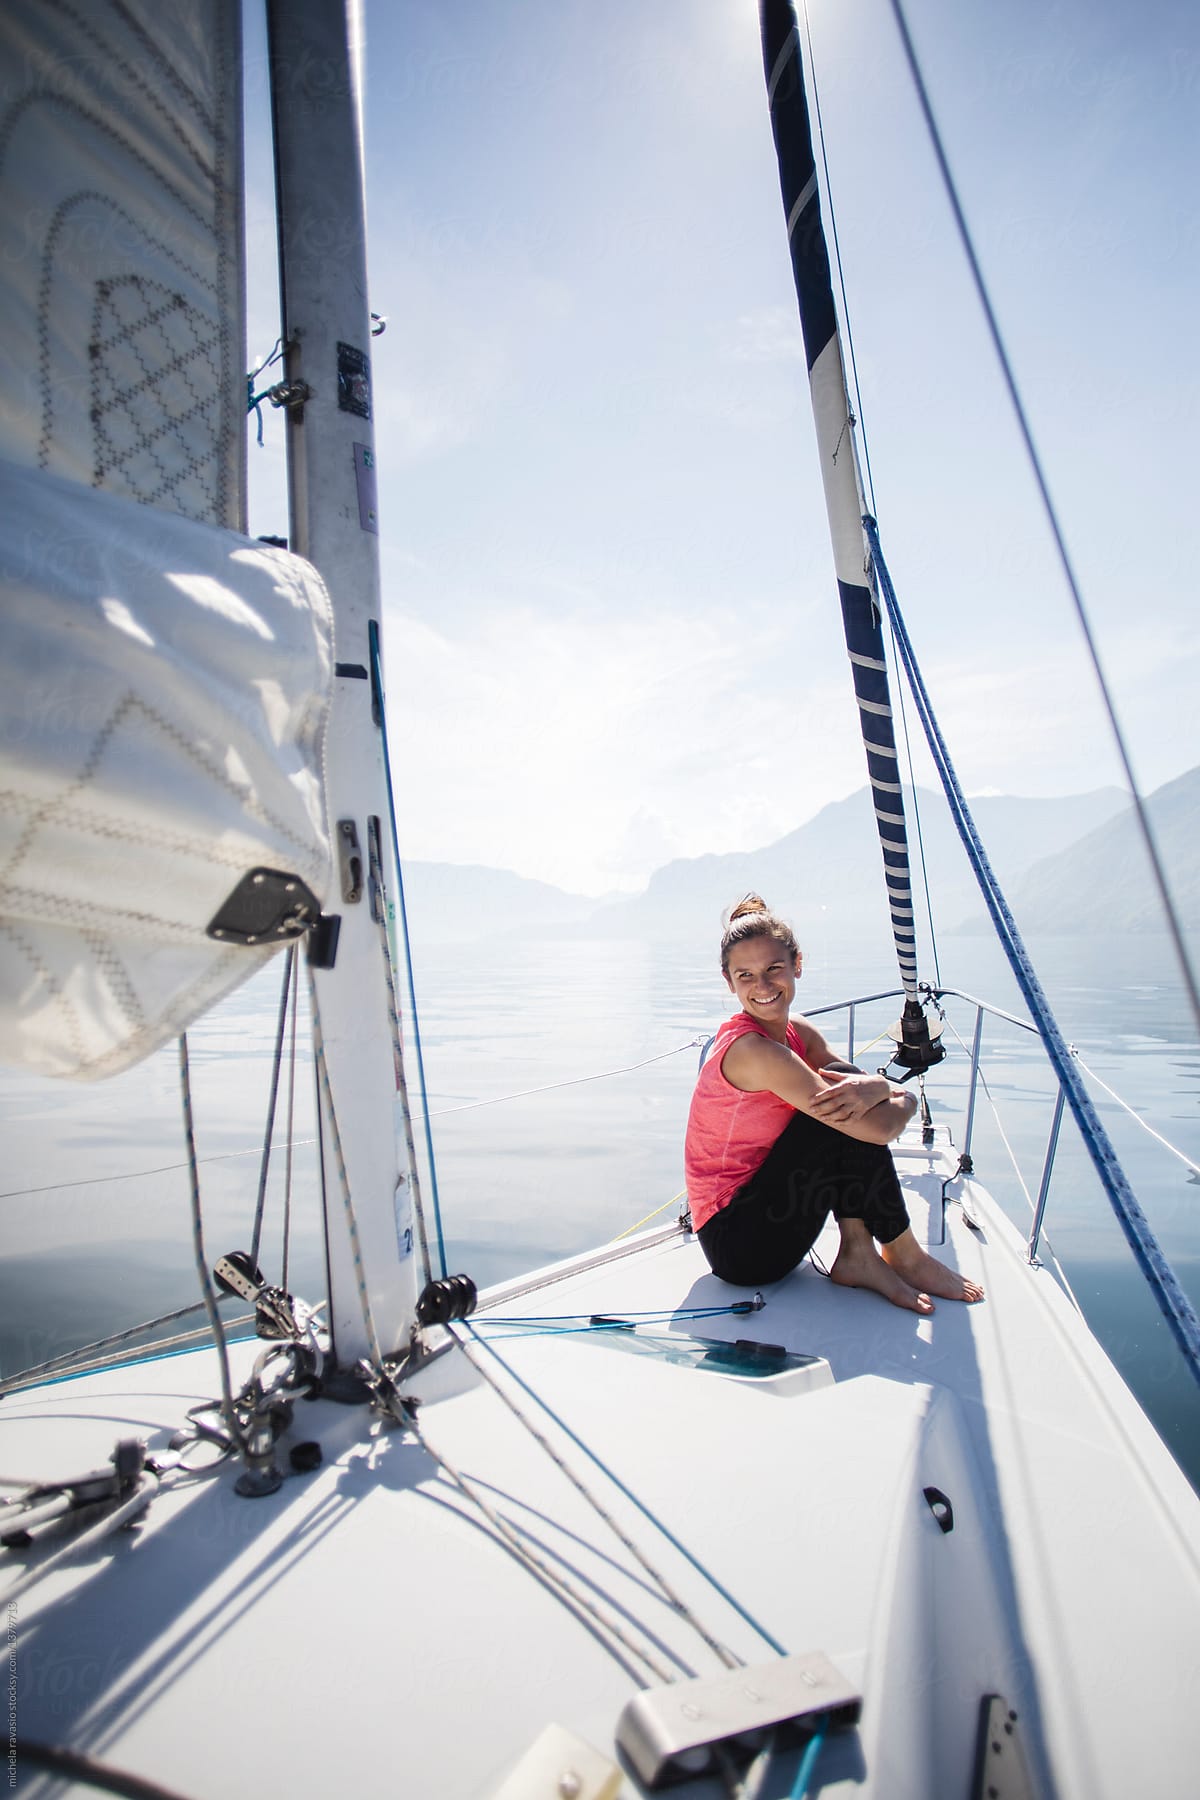 Smiling woman relaxes on a sail boat